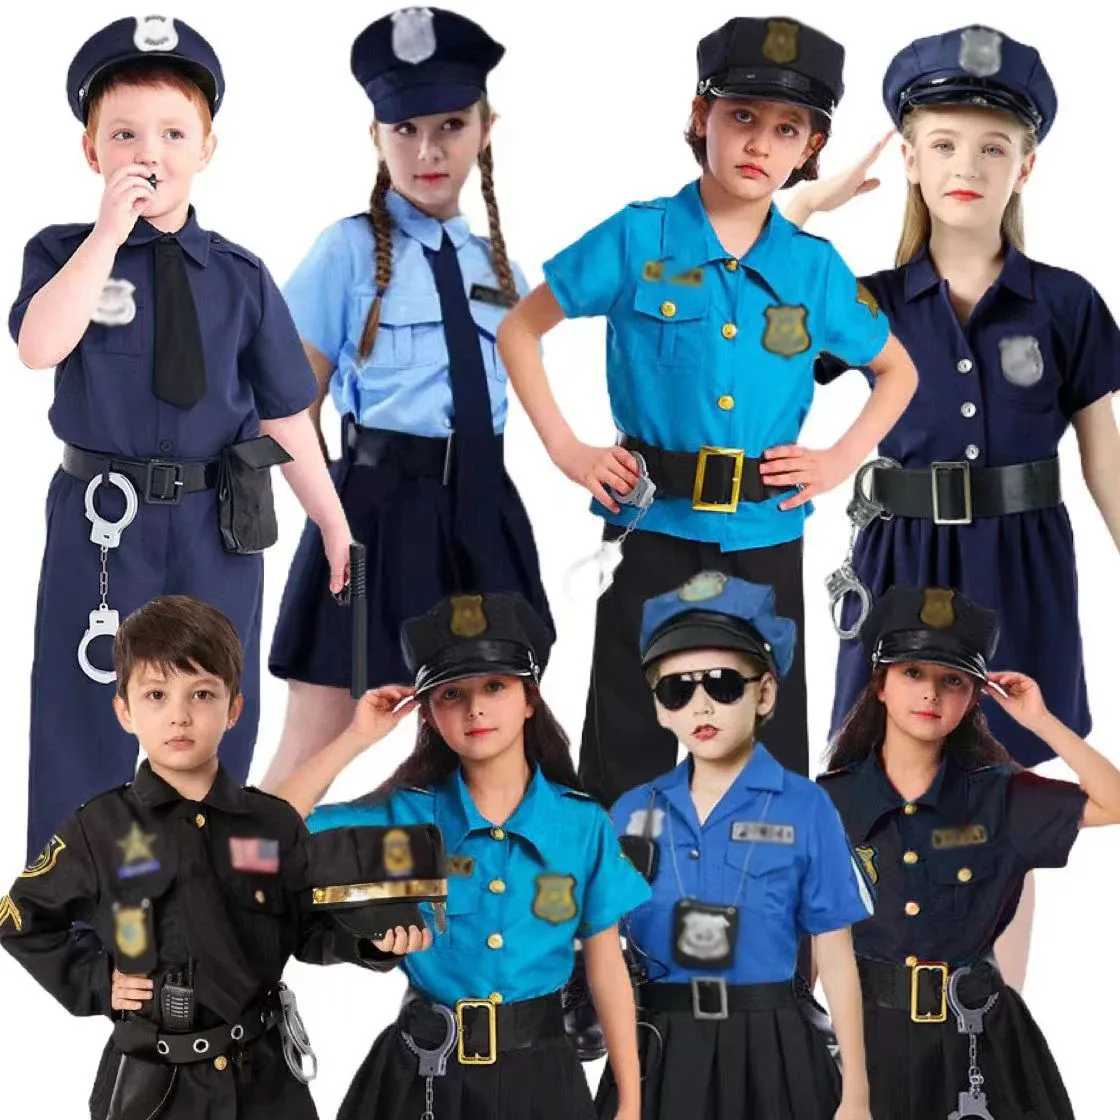 Halloween Anime-Style Sheriff Uniforms for Kids for Boys and Girls for Performing at Drag Ball Party Costumes